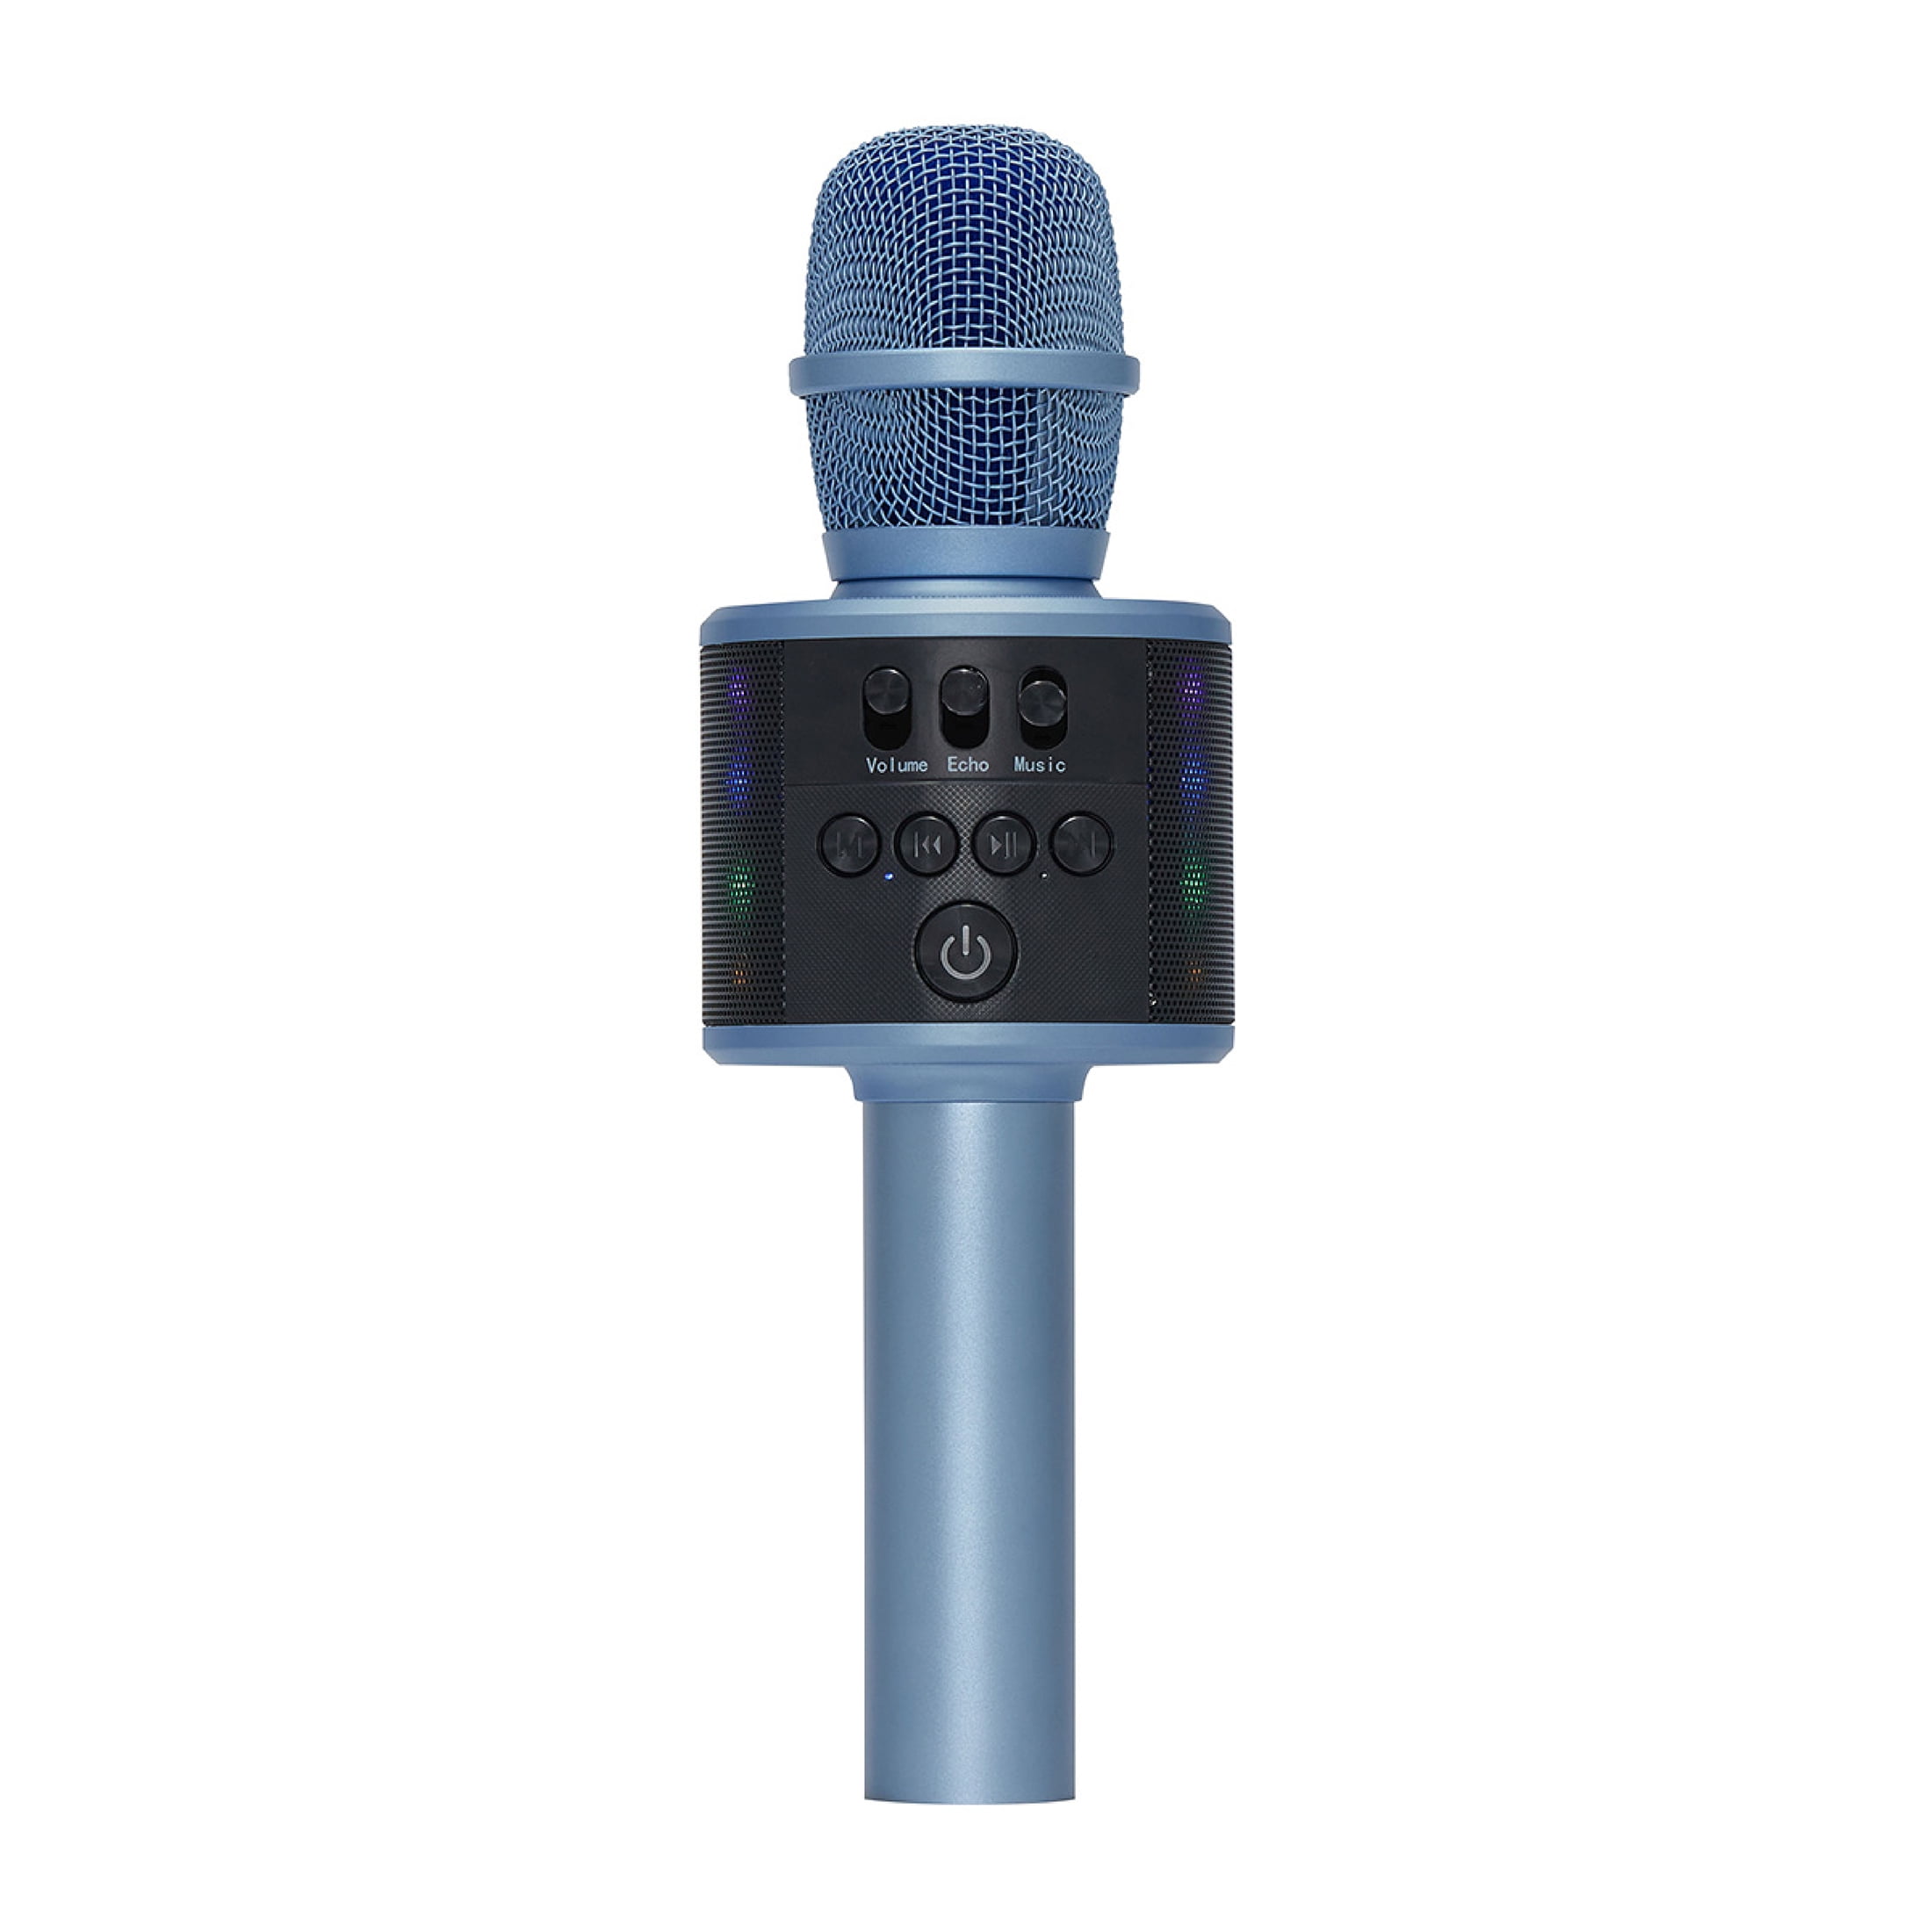 EARISE W1 Karaoke Microphone with 16.4ft Cord, Dynamic Vocal Microphone  Handheld Wired Microphone for Karaoke, Singing, Speech, Wedding, Stage